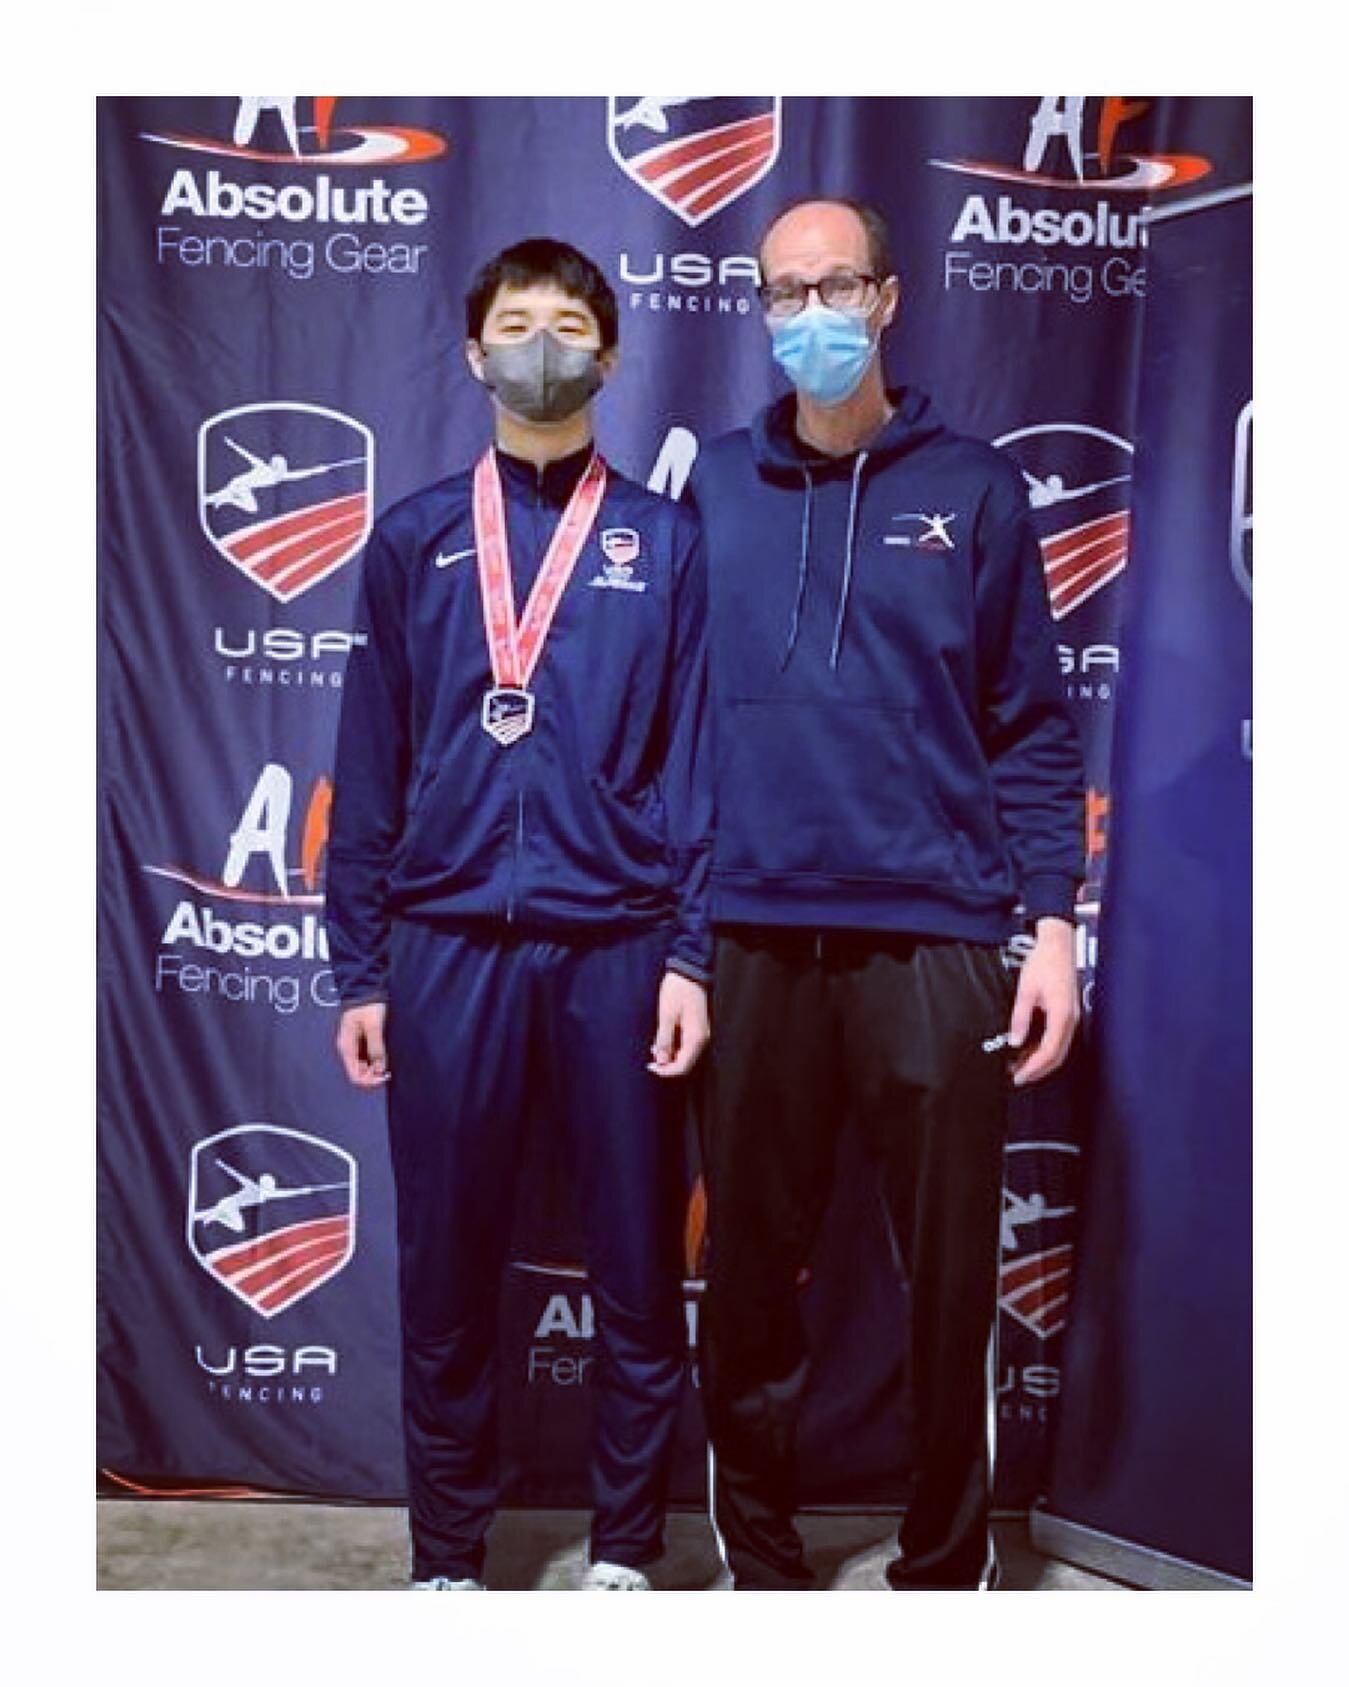 And almost forgot to mention that Ethan earned a Silver medal in JMF. Congratulations to Ethan and all of our athletes. Safe travels. #marxfencingacademy #acenterforexcellence #usfencing#podiumfinish